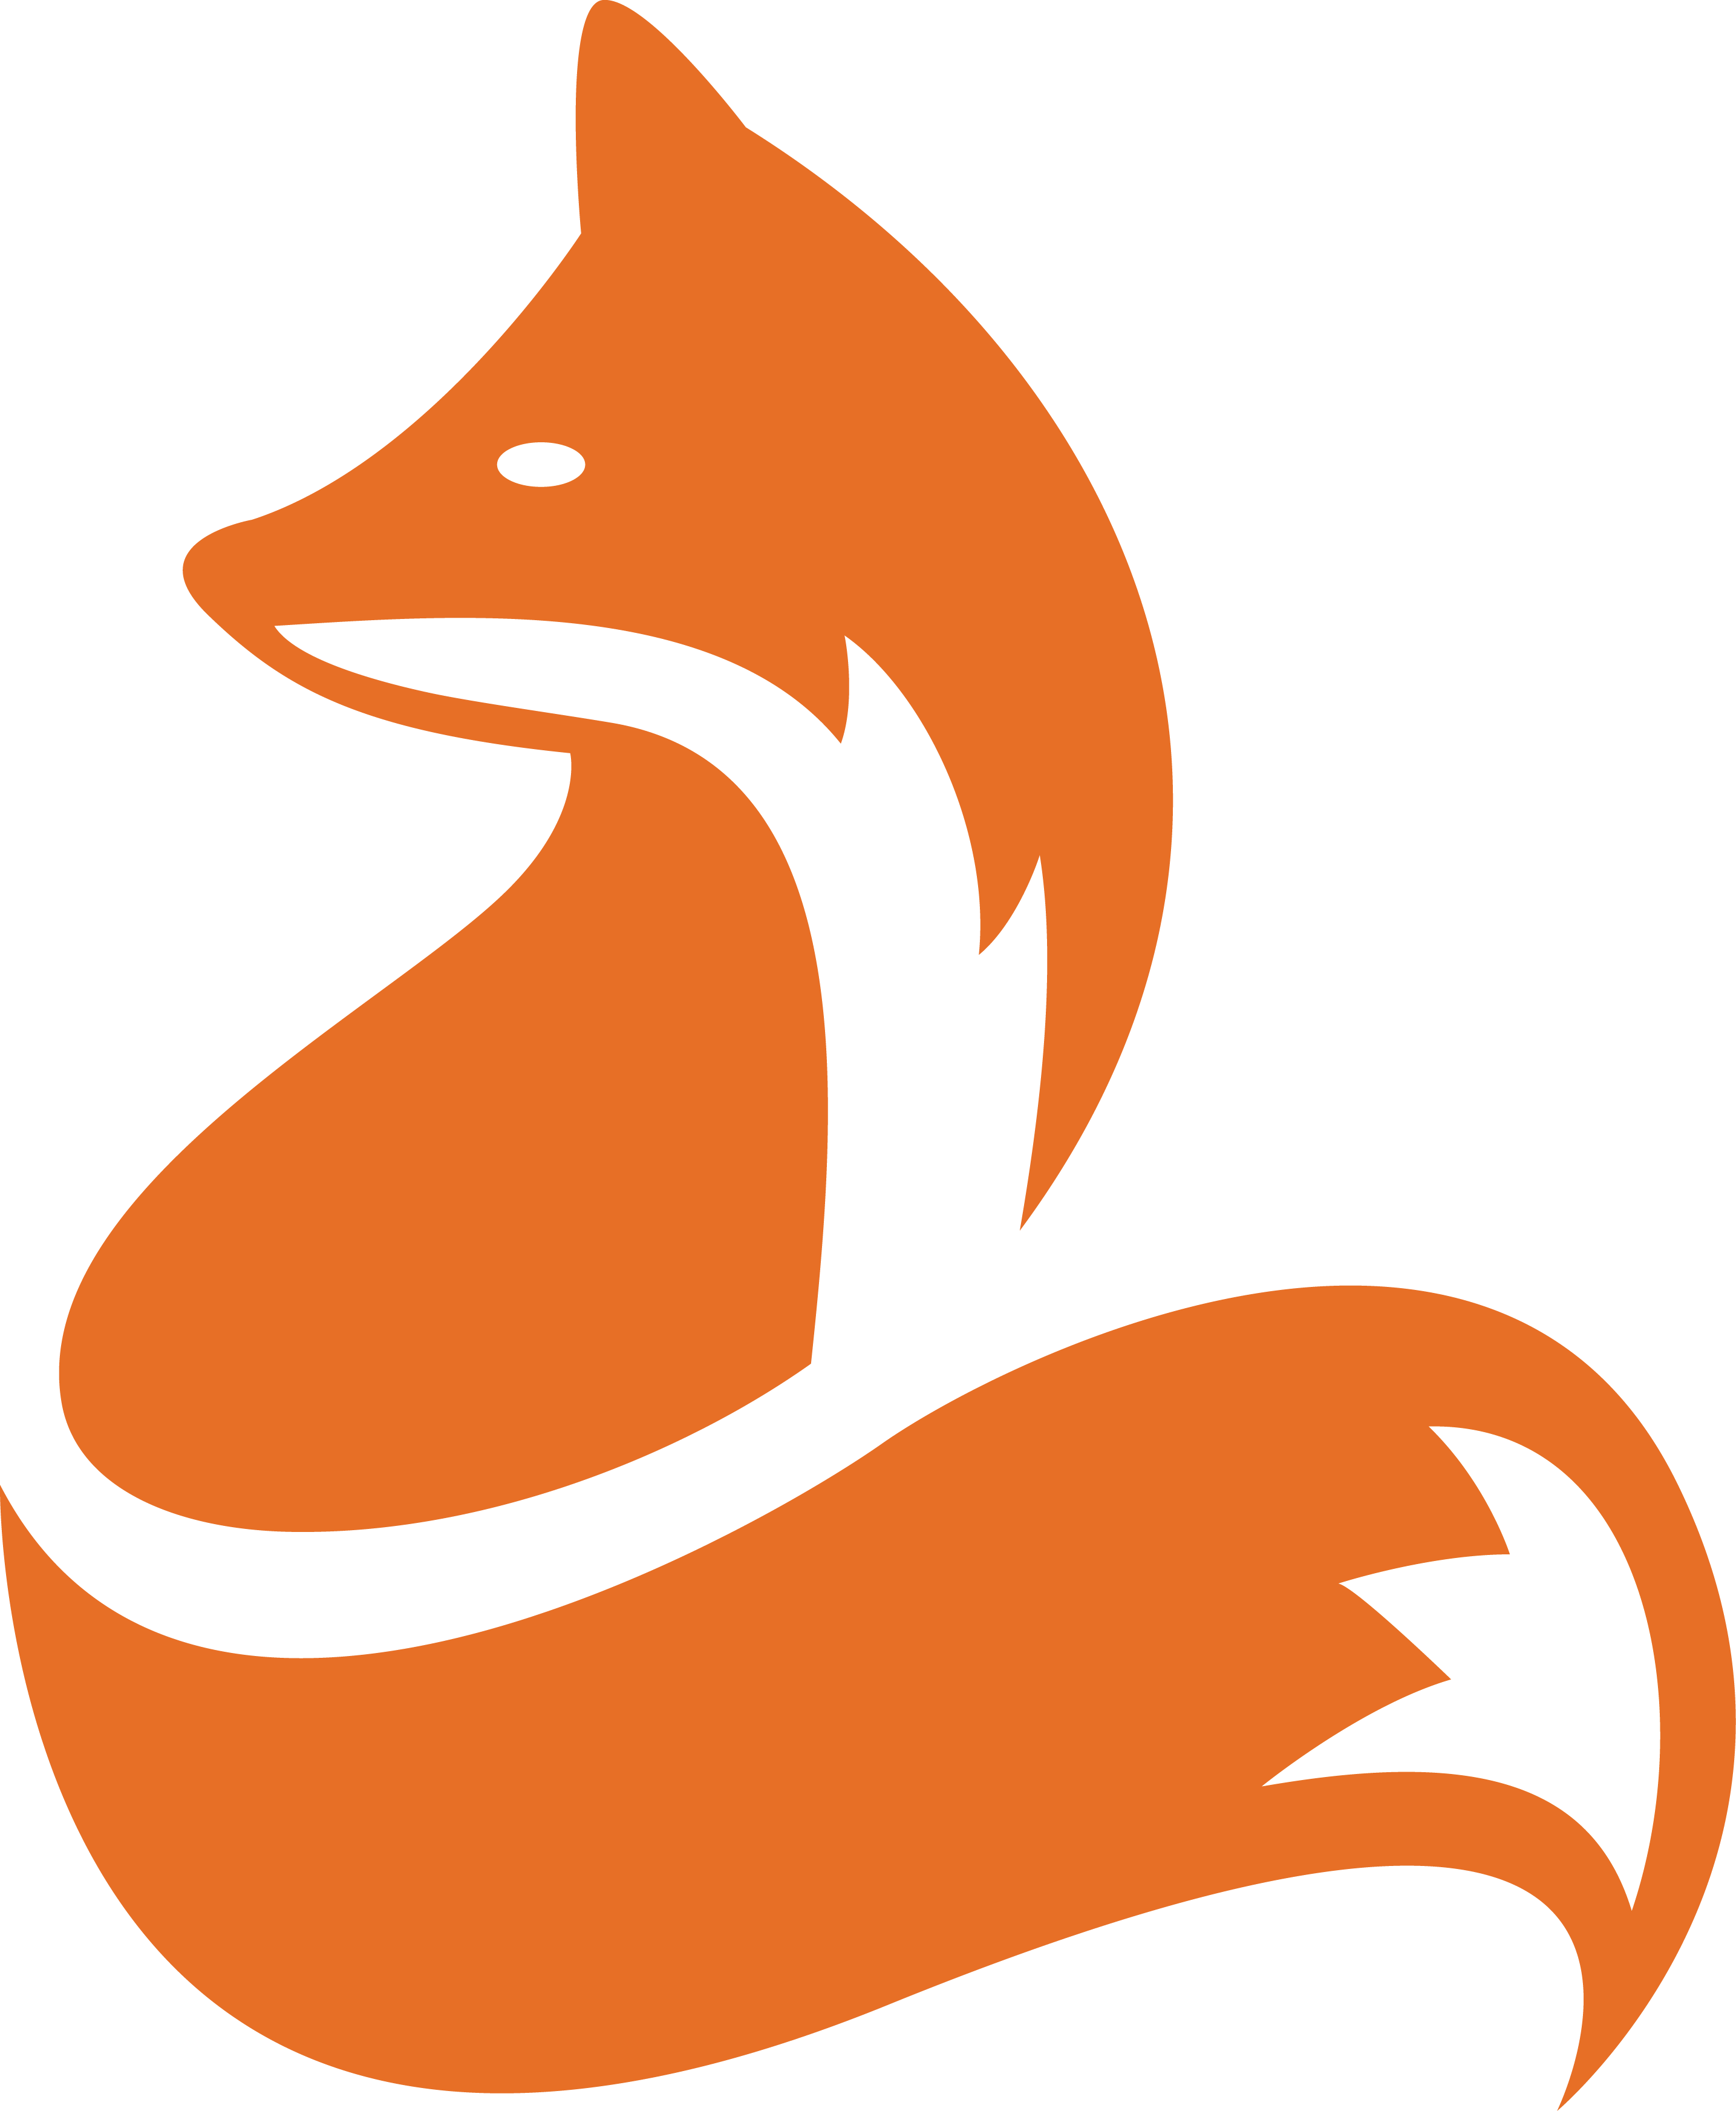 Fox Fox Clipart Logo Png Transparent Image And Clipart For Free ...